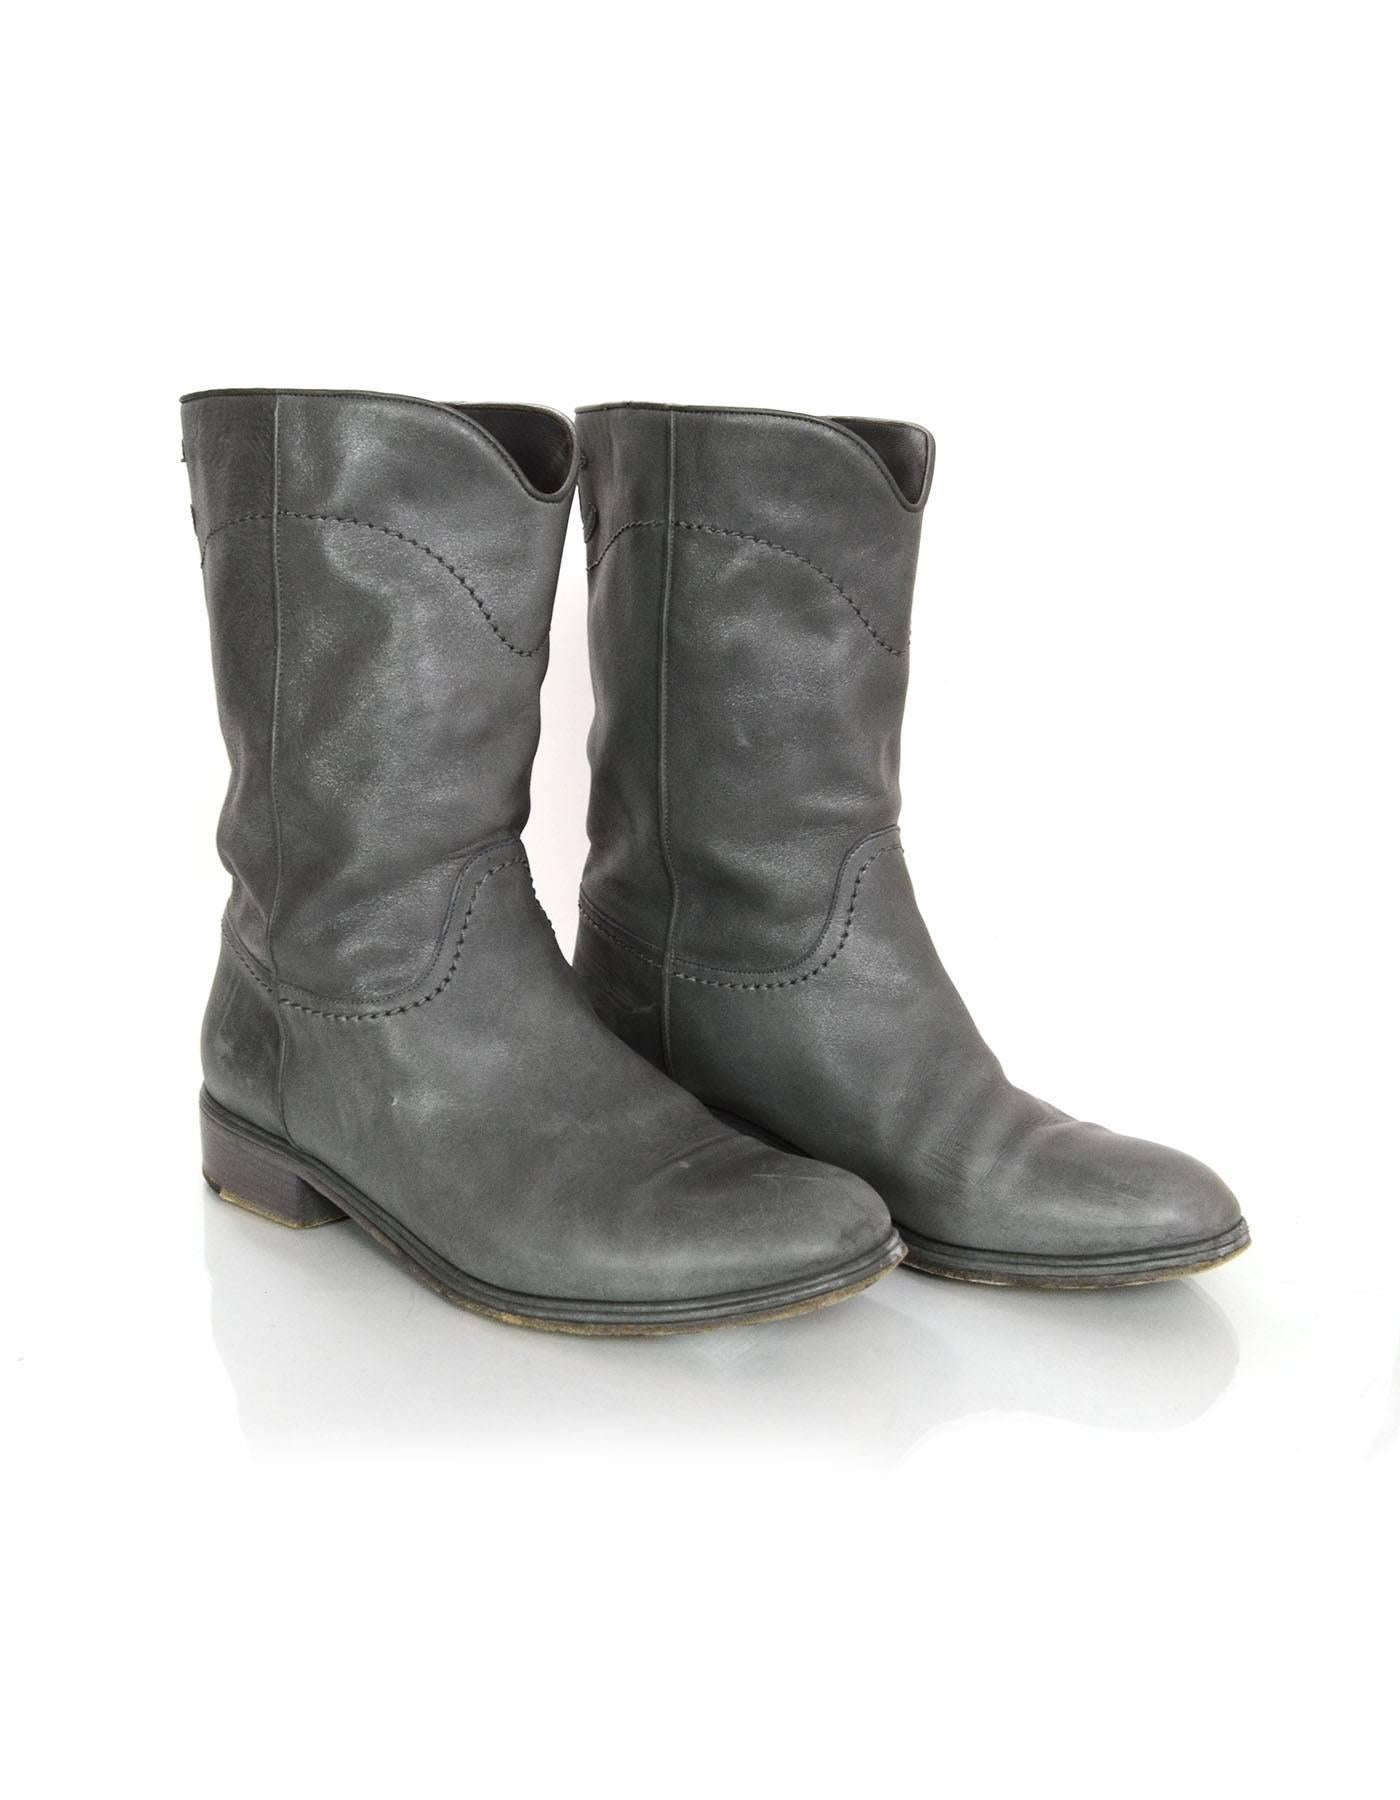 Gray Chanel Grey Leather Calf-High Boots sz 41